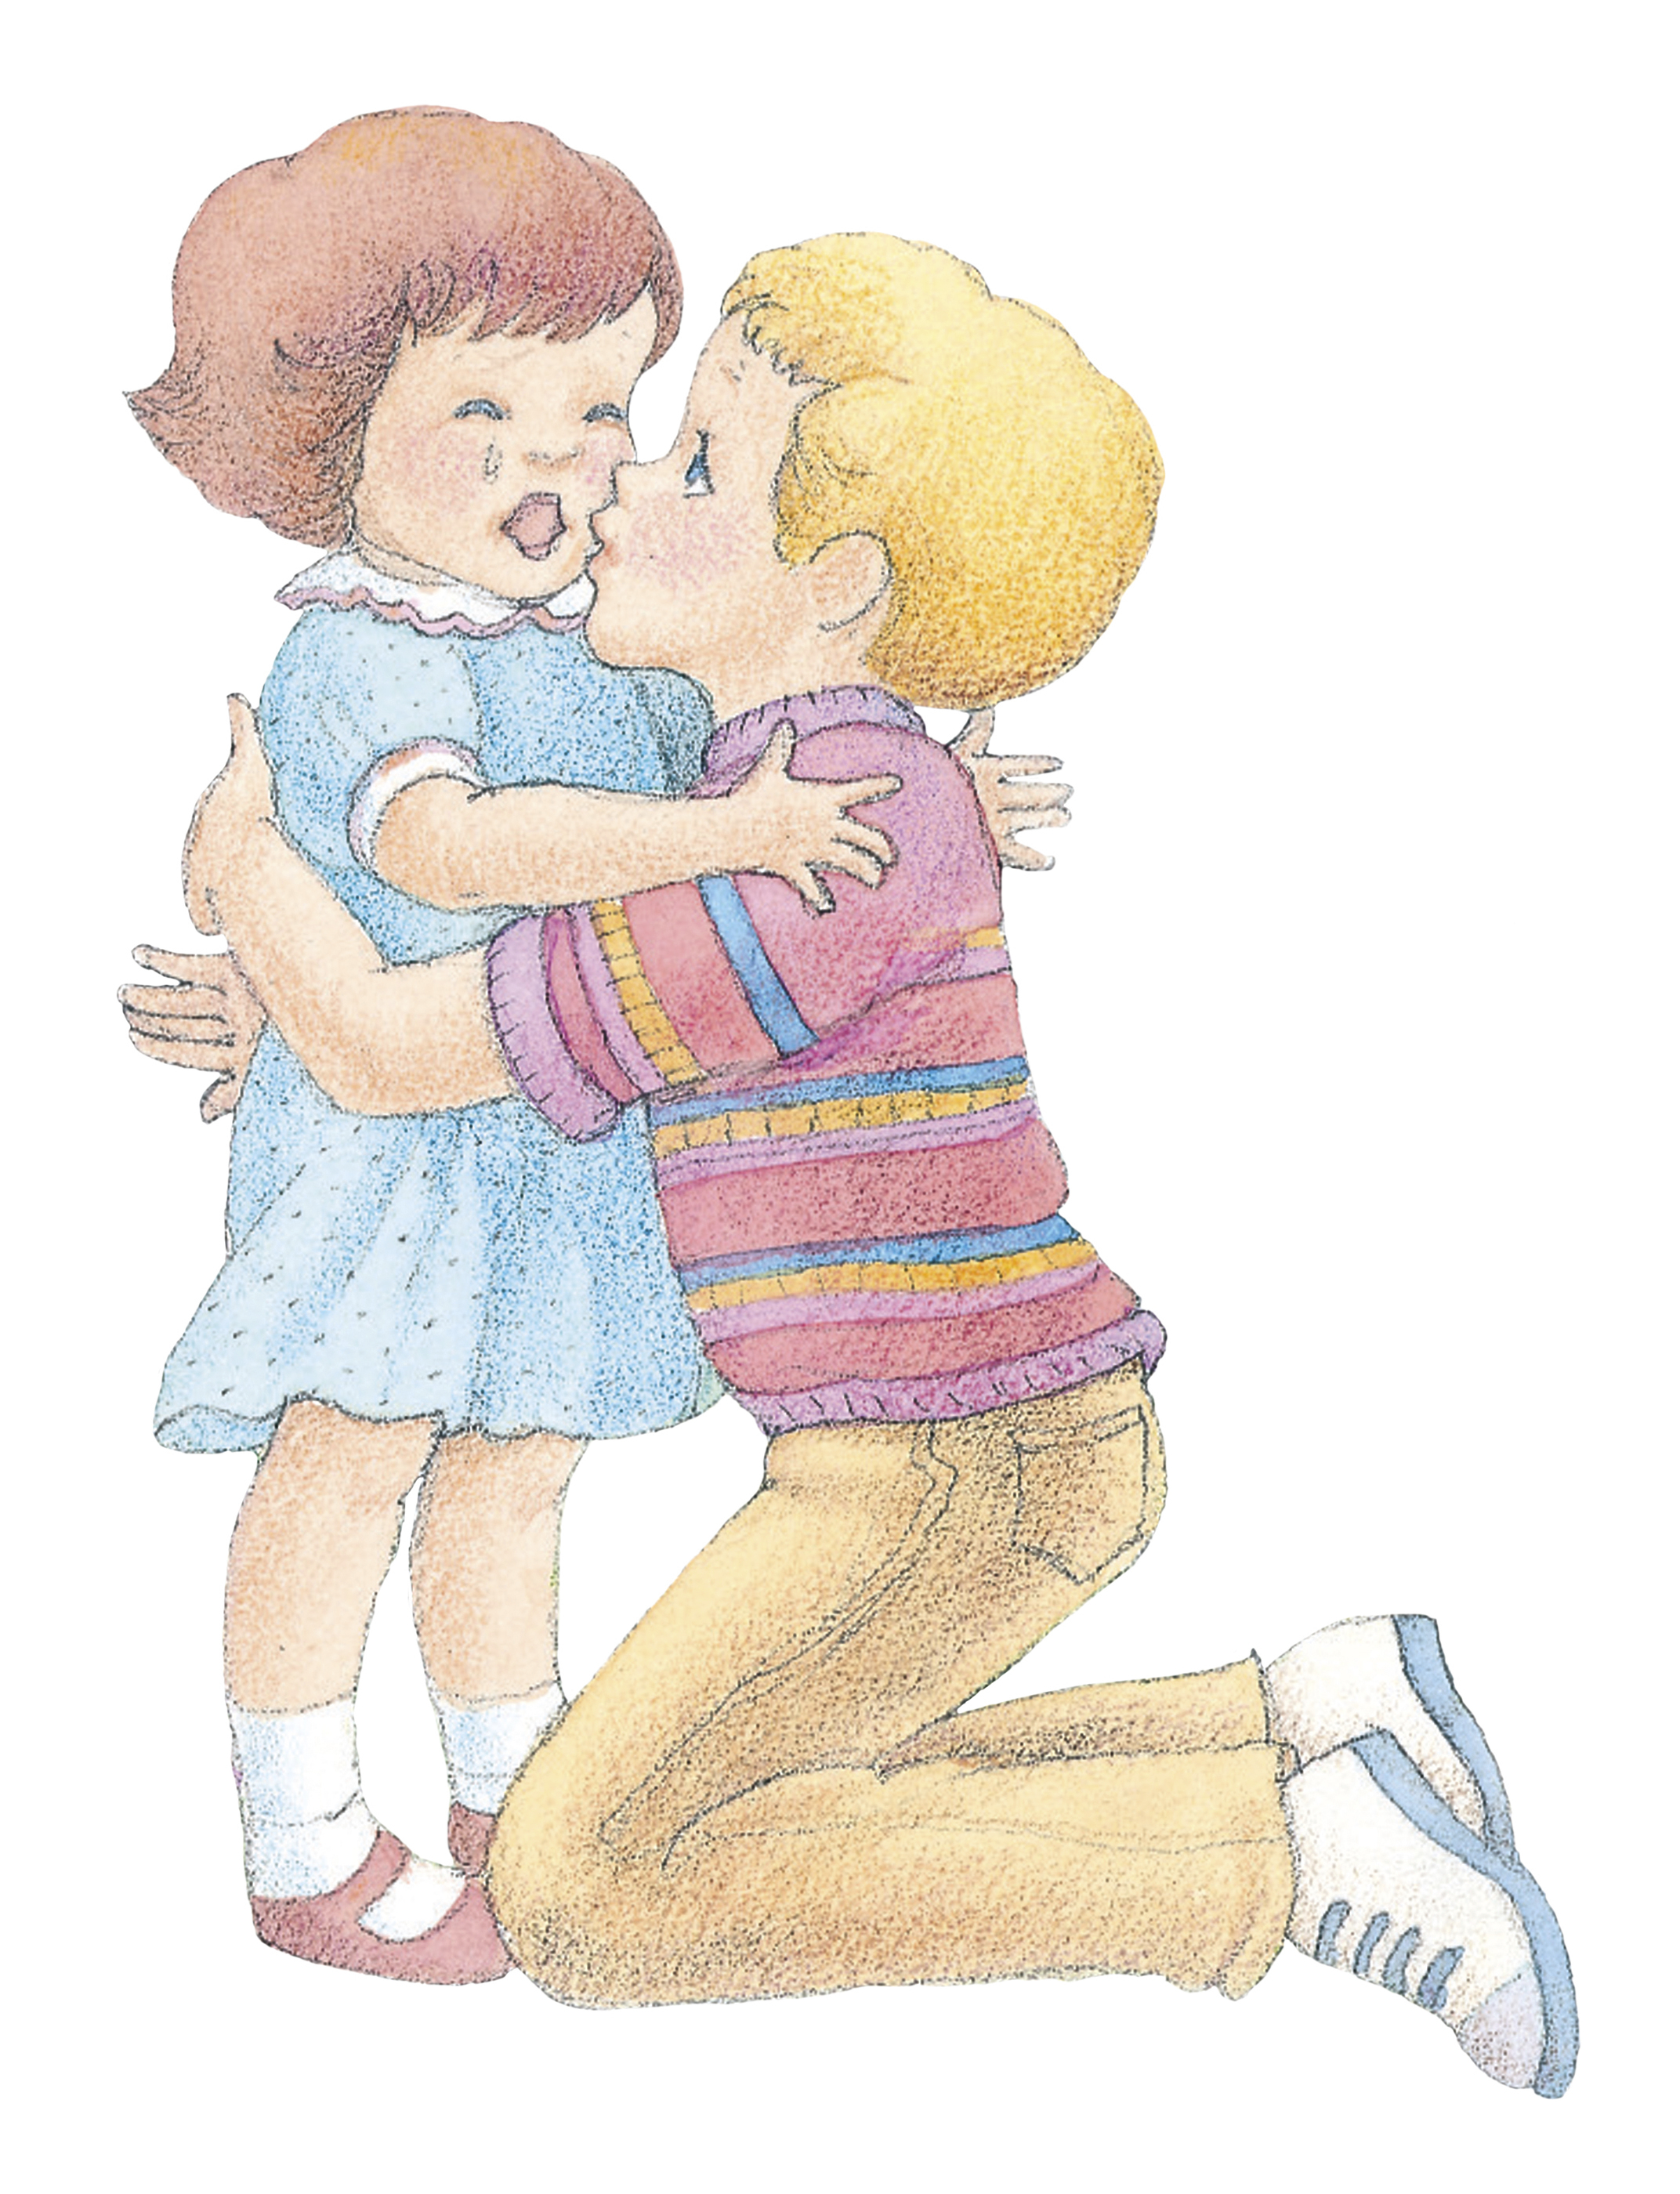 A young boy comforting his crying sister. From the Children’s Songbook, page 78, “I’m Trying to Be like Jesus”; watercolor illustration by Phyllis Luch.